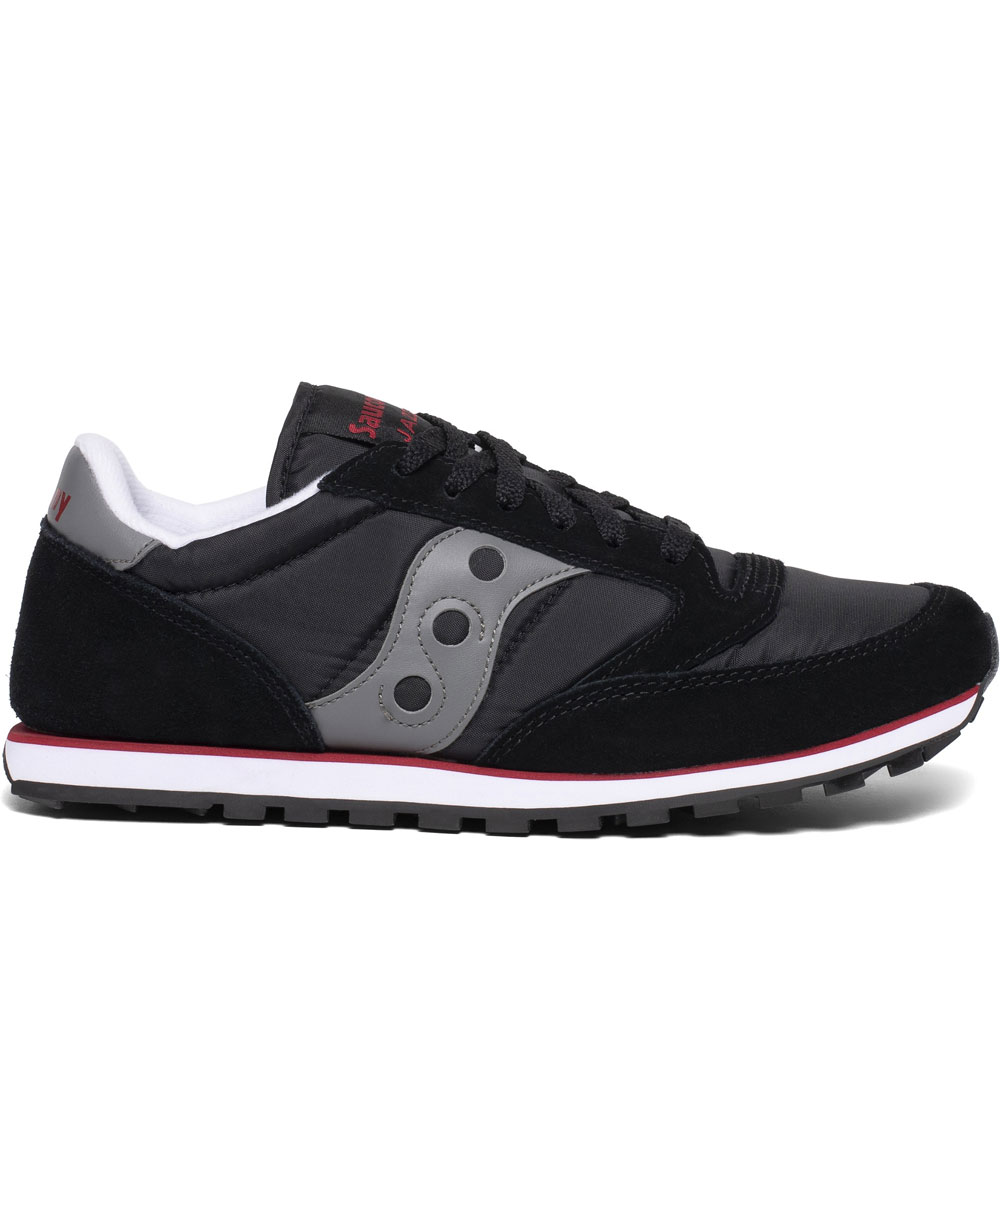 Jazz Low Pro Sneakers Shoes Black/Grey/Red